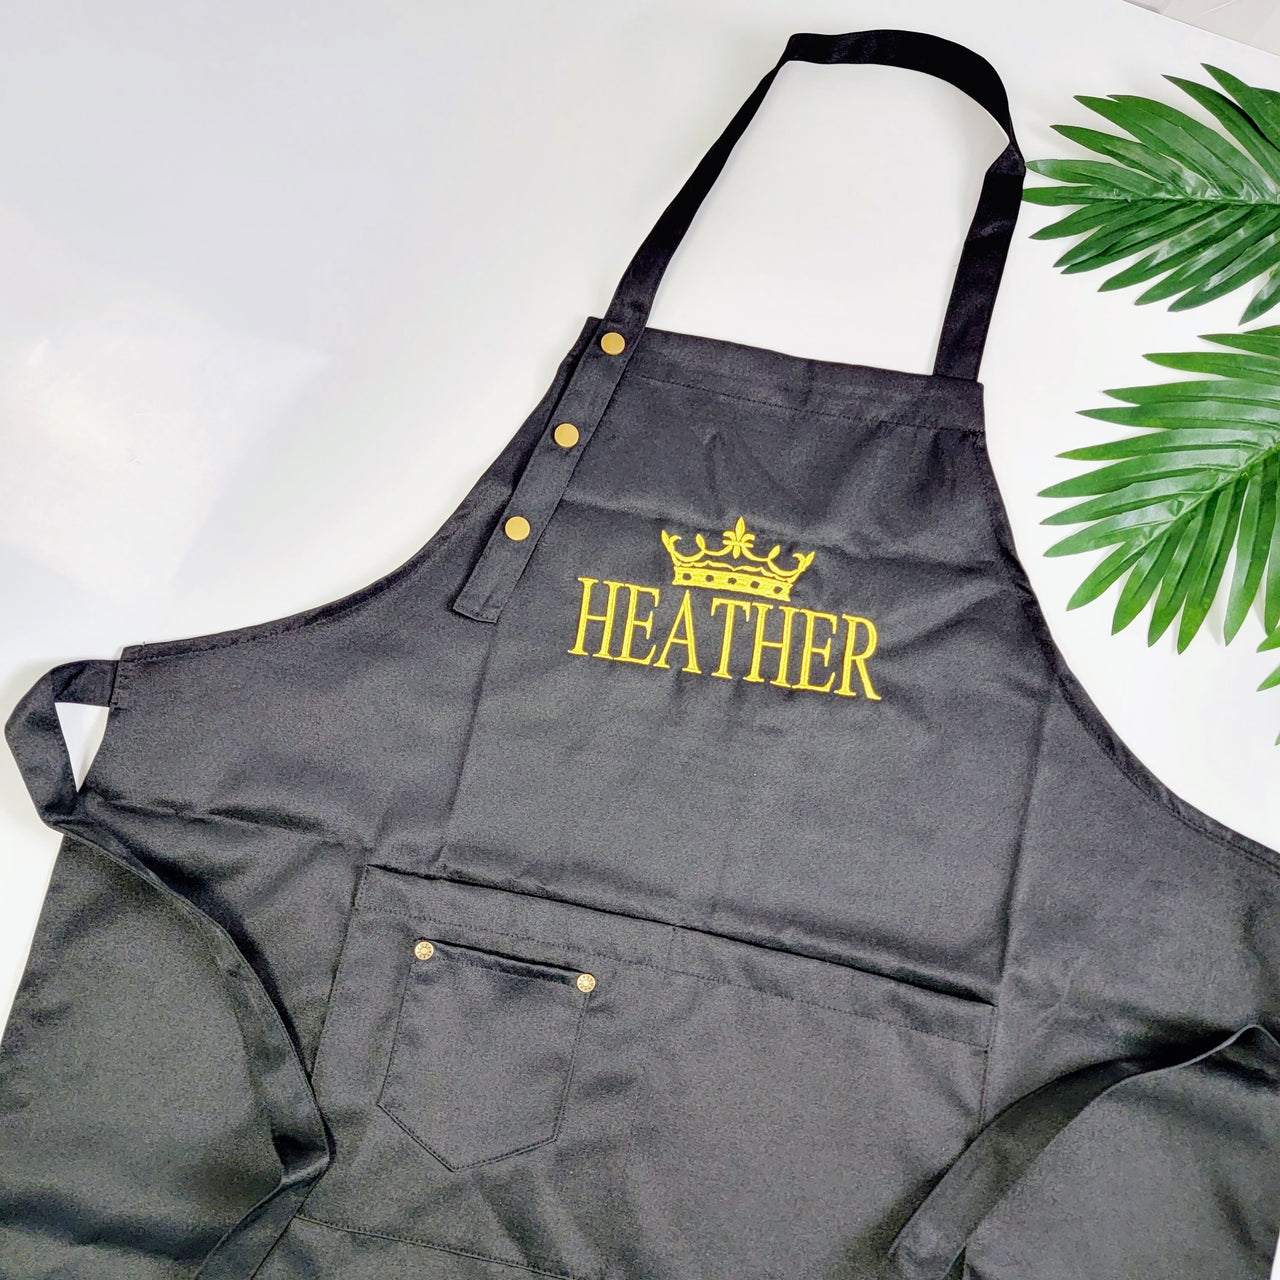 Personalized Aprons - Aprons for Women - Aprons for Men - Embroidered Cooking Apron with Pocket - Apron with Name - Cooking Gift